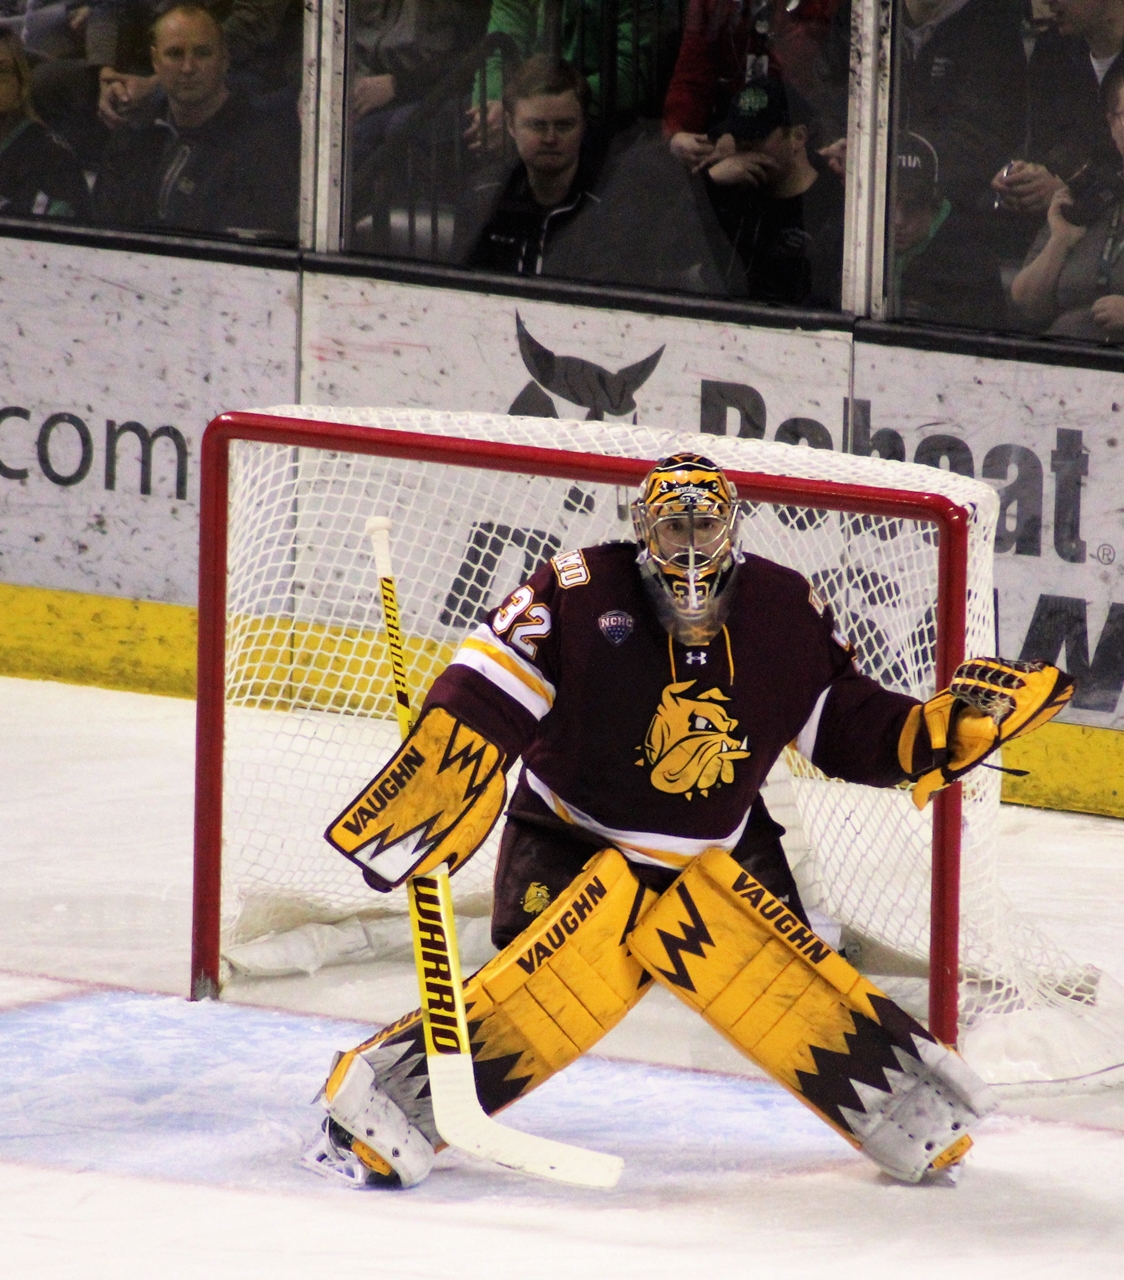 NCHC Exceeding Expectation After Six Seasons